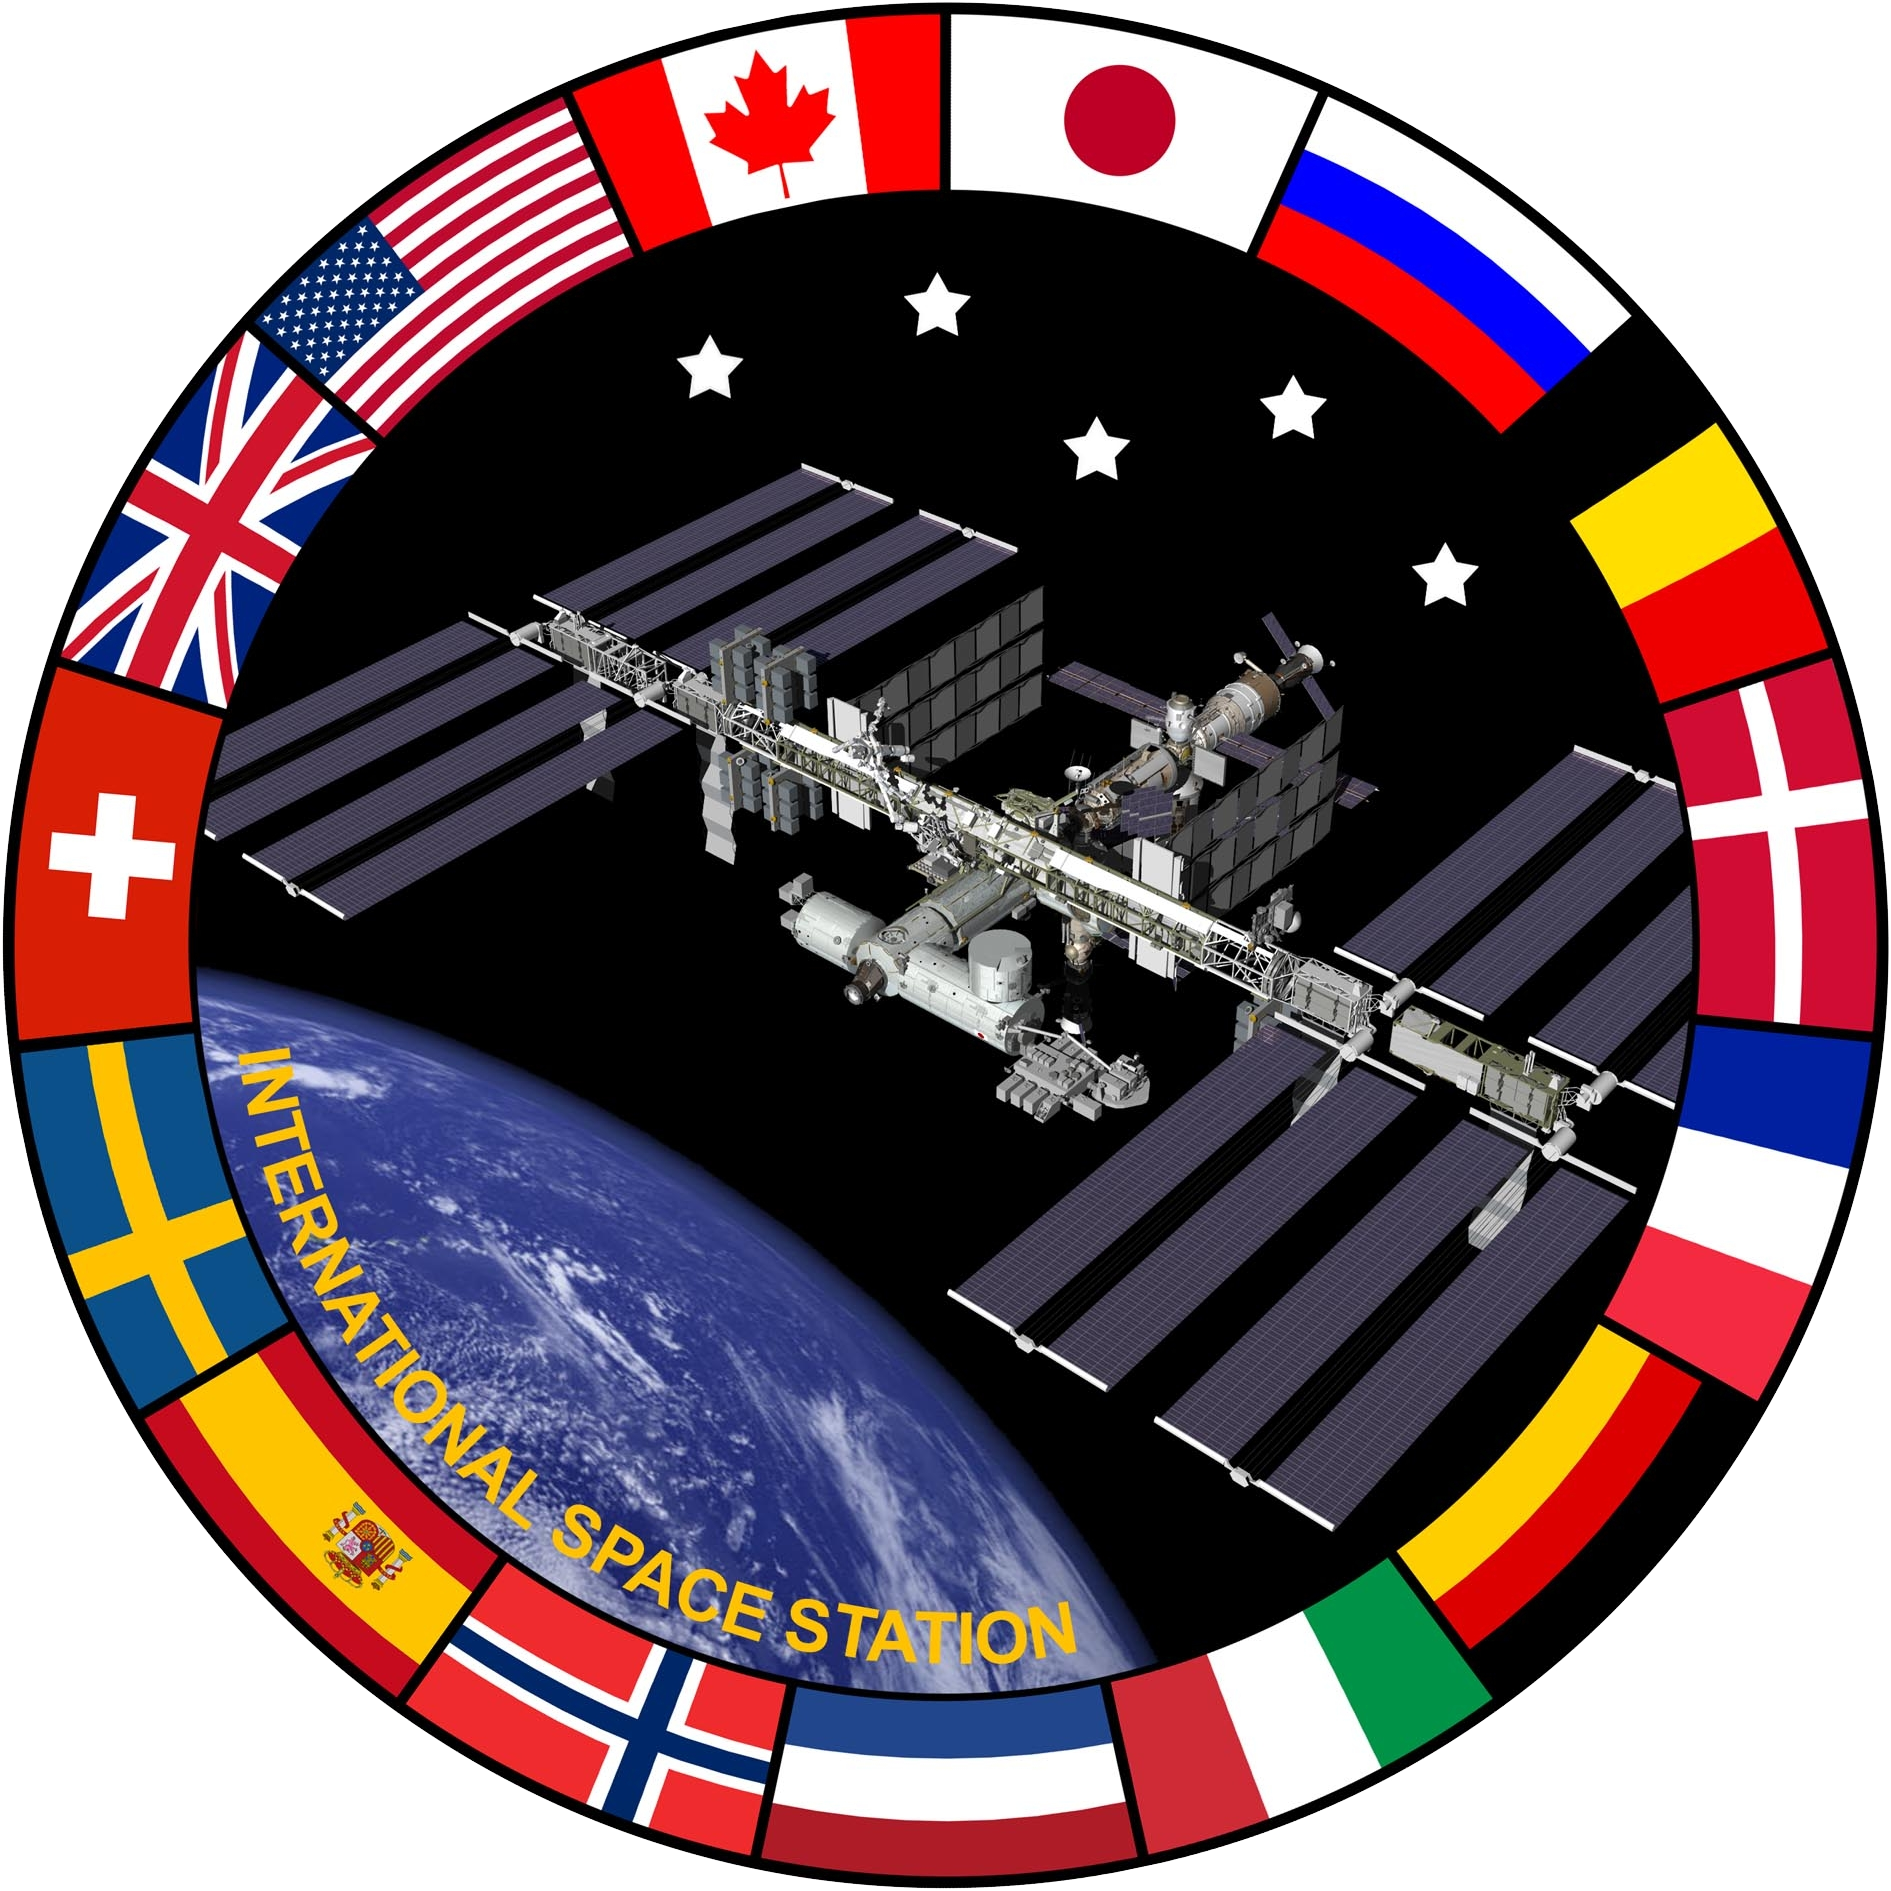 Sanctions on Russia Causing Some Ripples in Collaborative ISS Activities